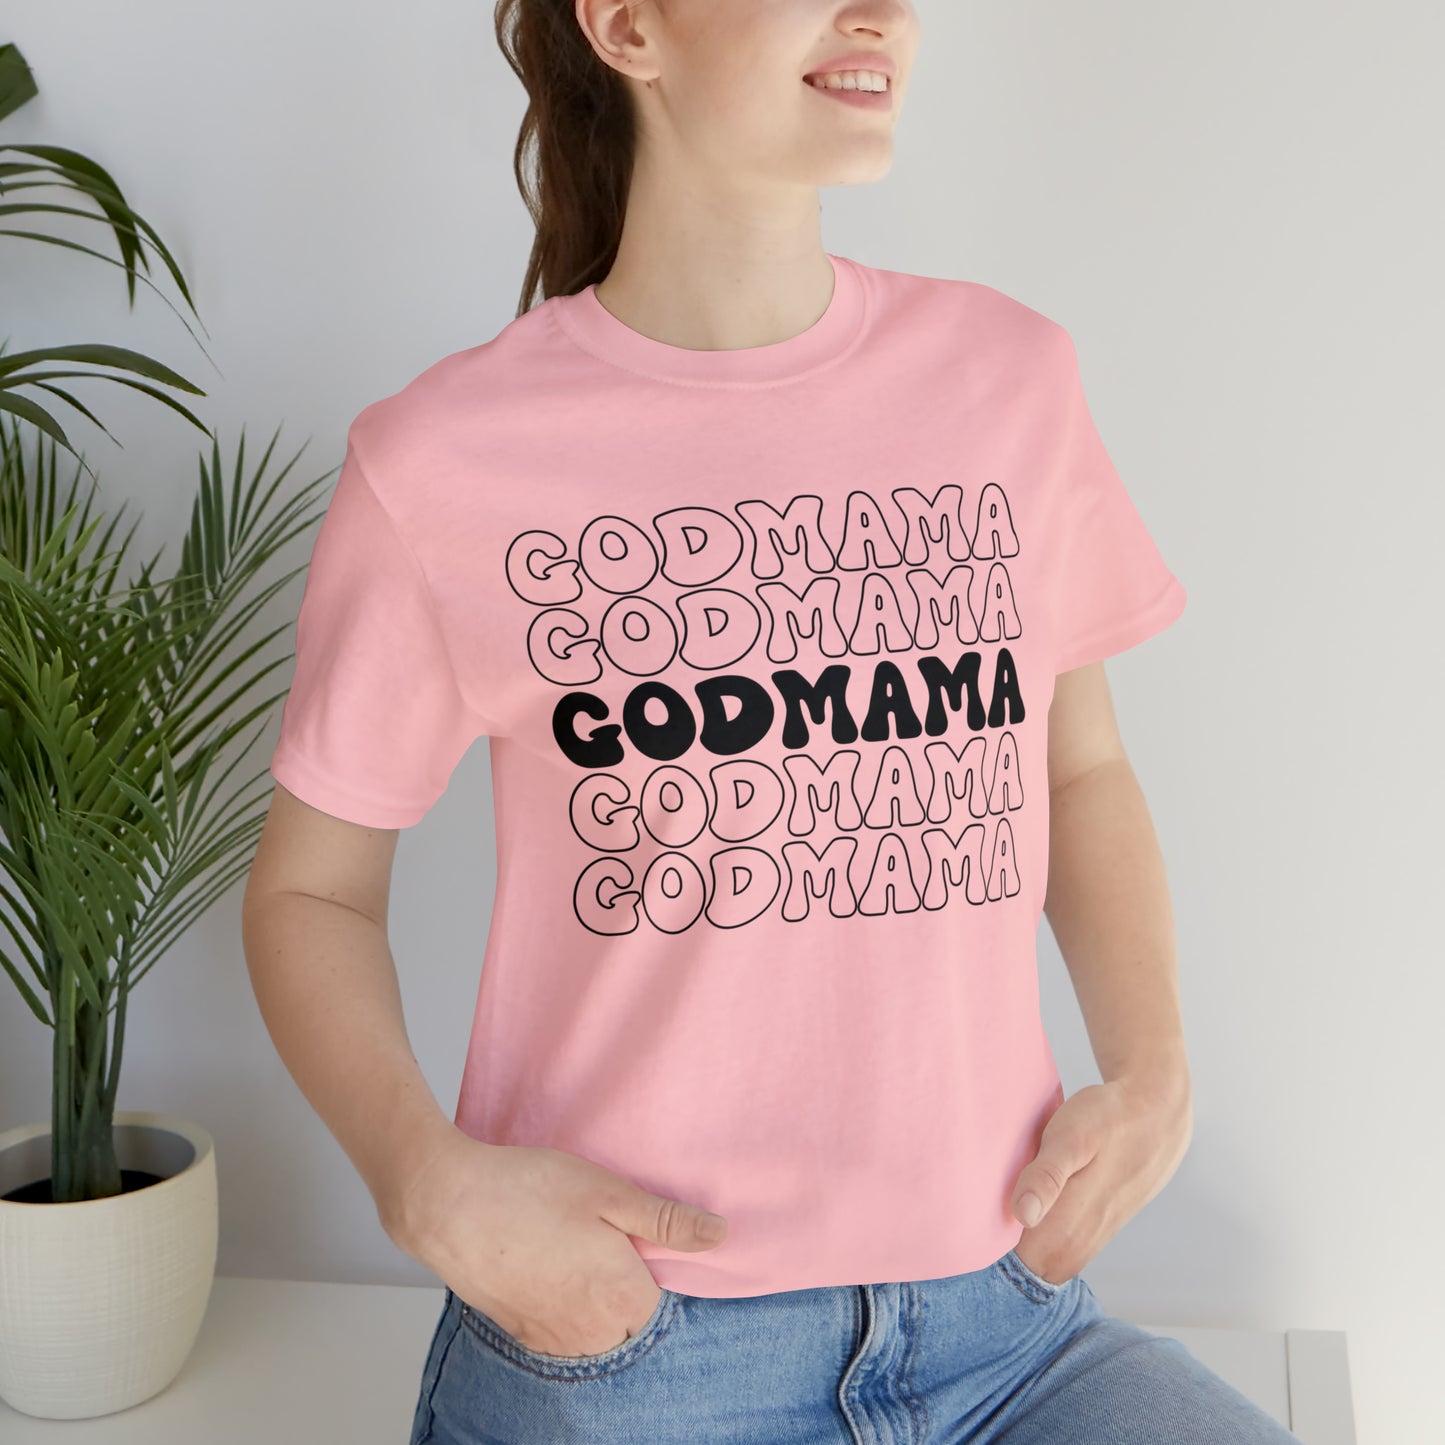 Retro Godmother Shirt for Mother's Day, Godmother Gift from Goddaughter, Cute Godmama Gift for Baptism, God Mother Proposal, T249